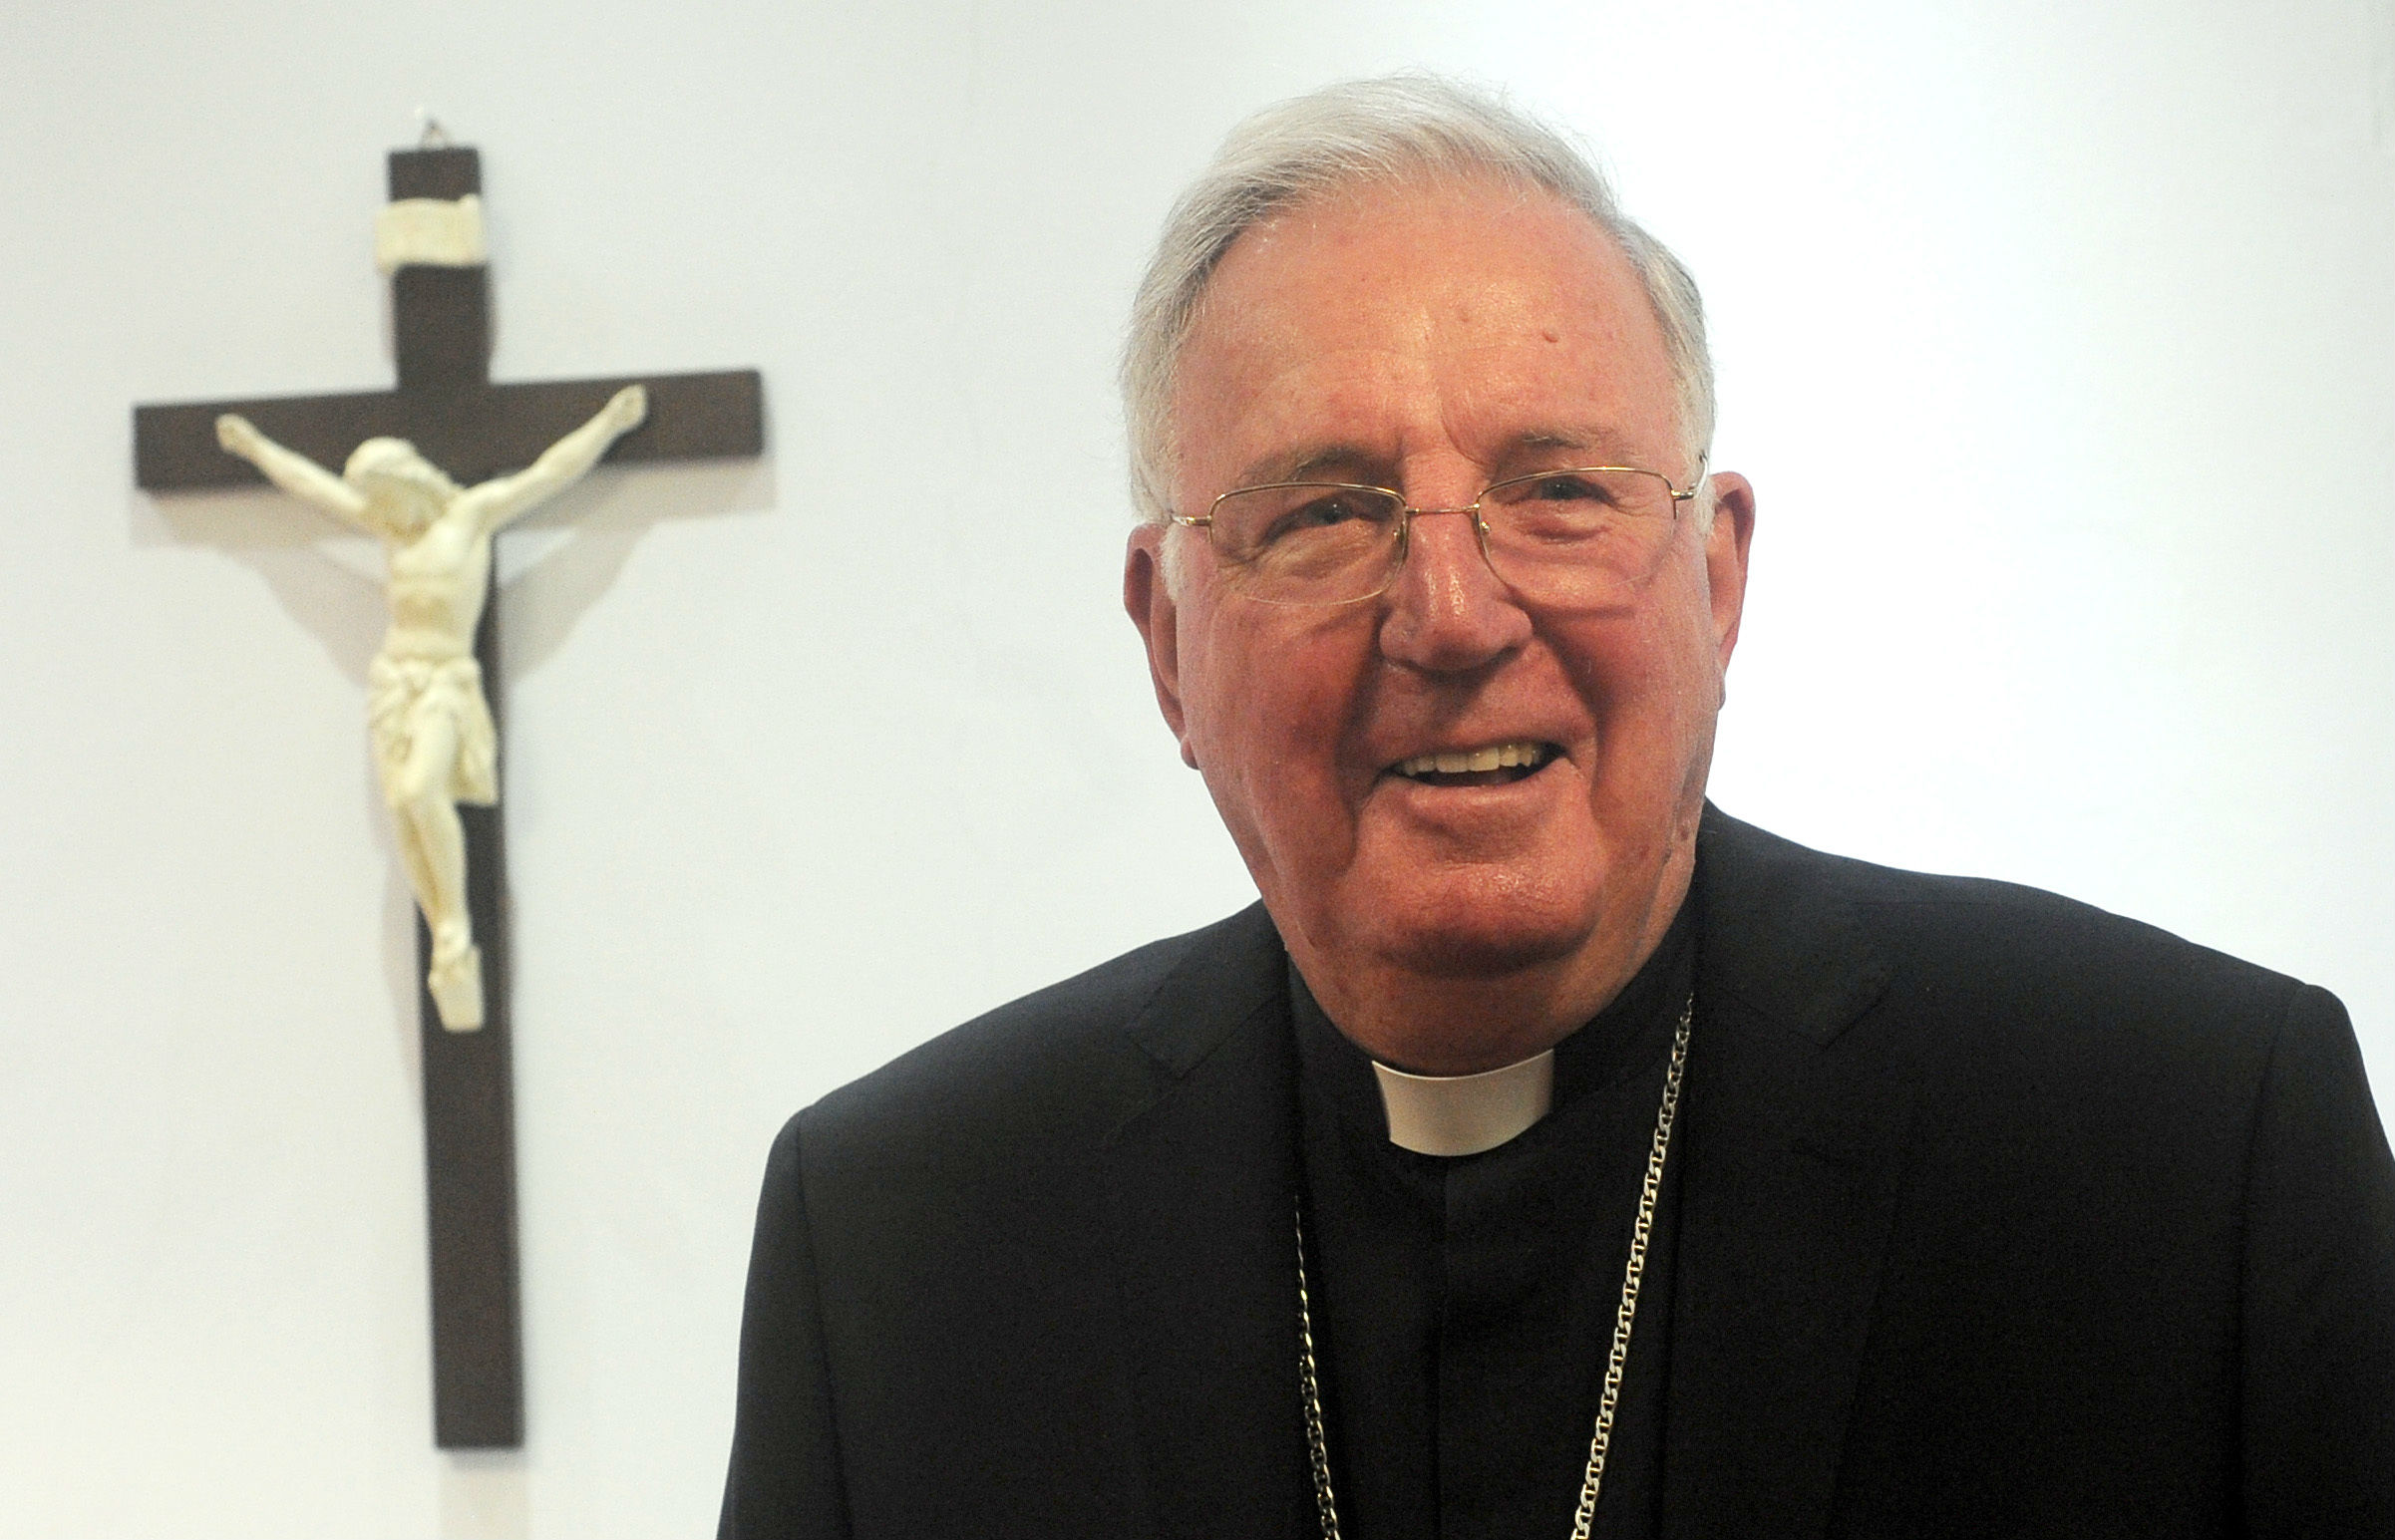 Cardinal Cormac Murphy-O'Connor dies peacefully surrounded by family and friends